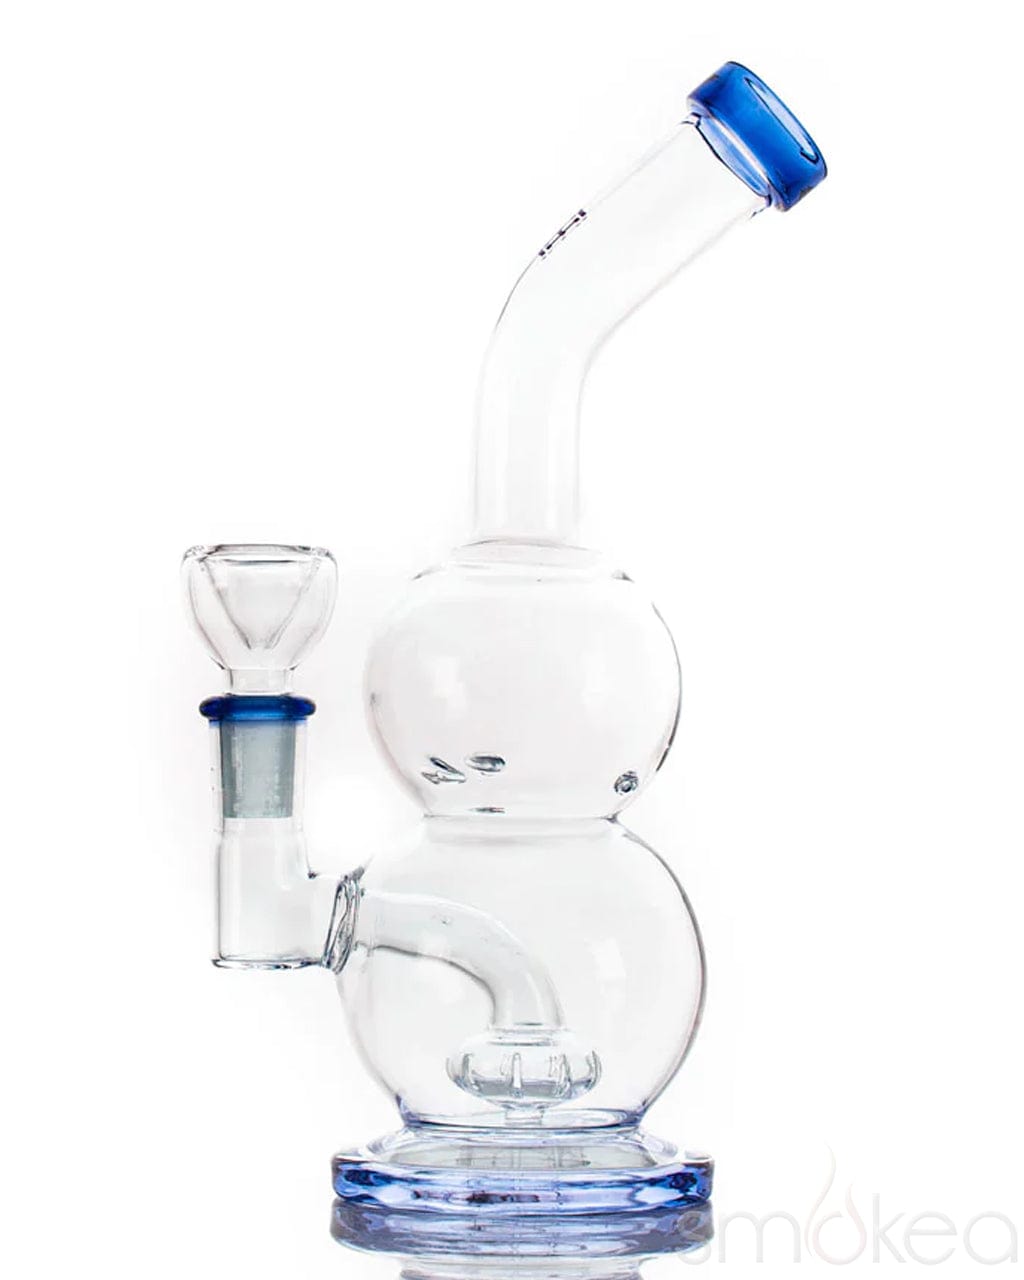 Can Smoking from a Bong Be Healthier - Read More - HEMPER